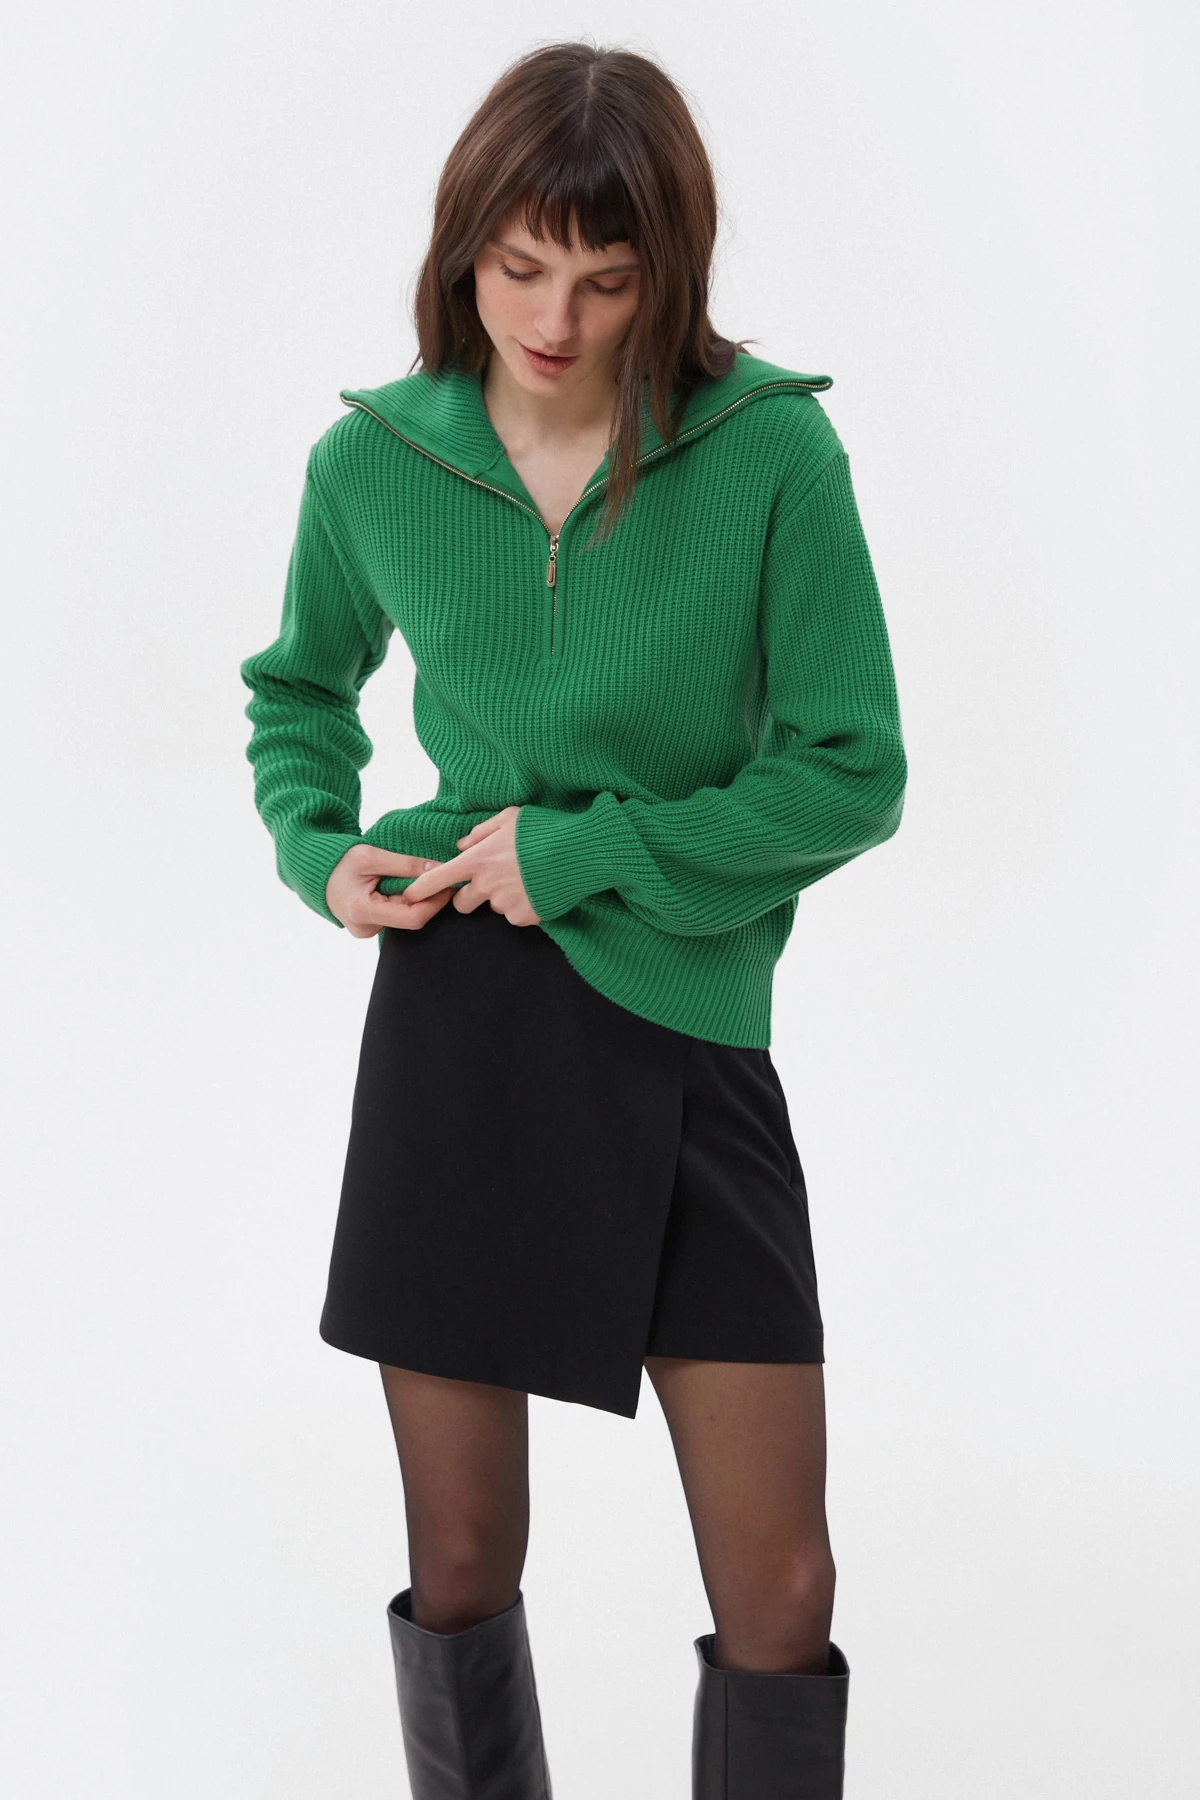 Green cotton zip-up knit sweater, photo 2